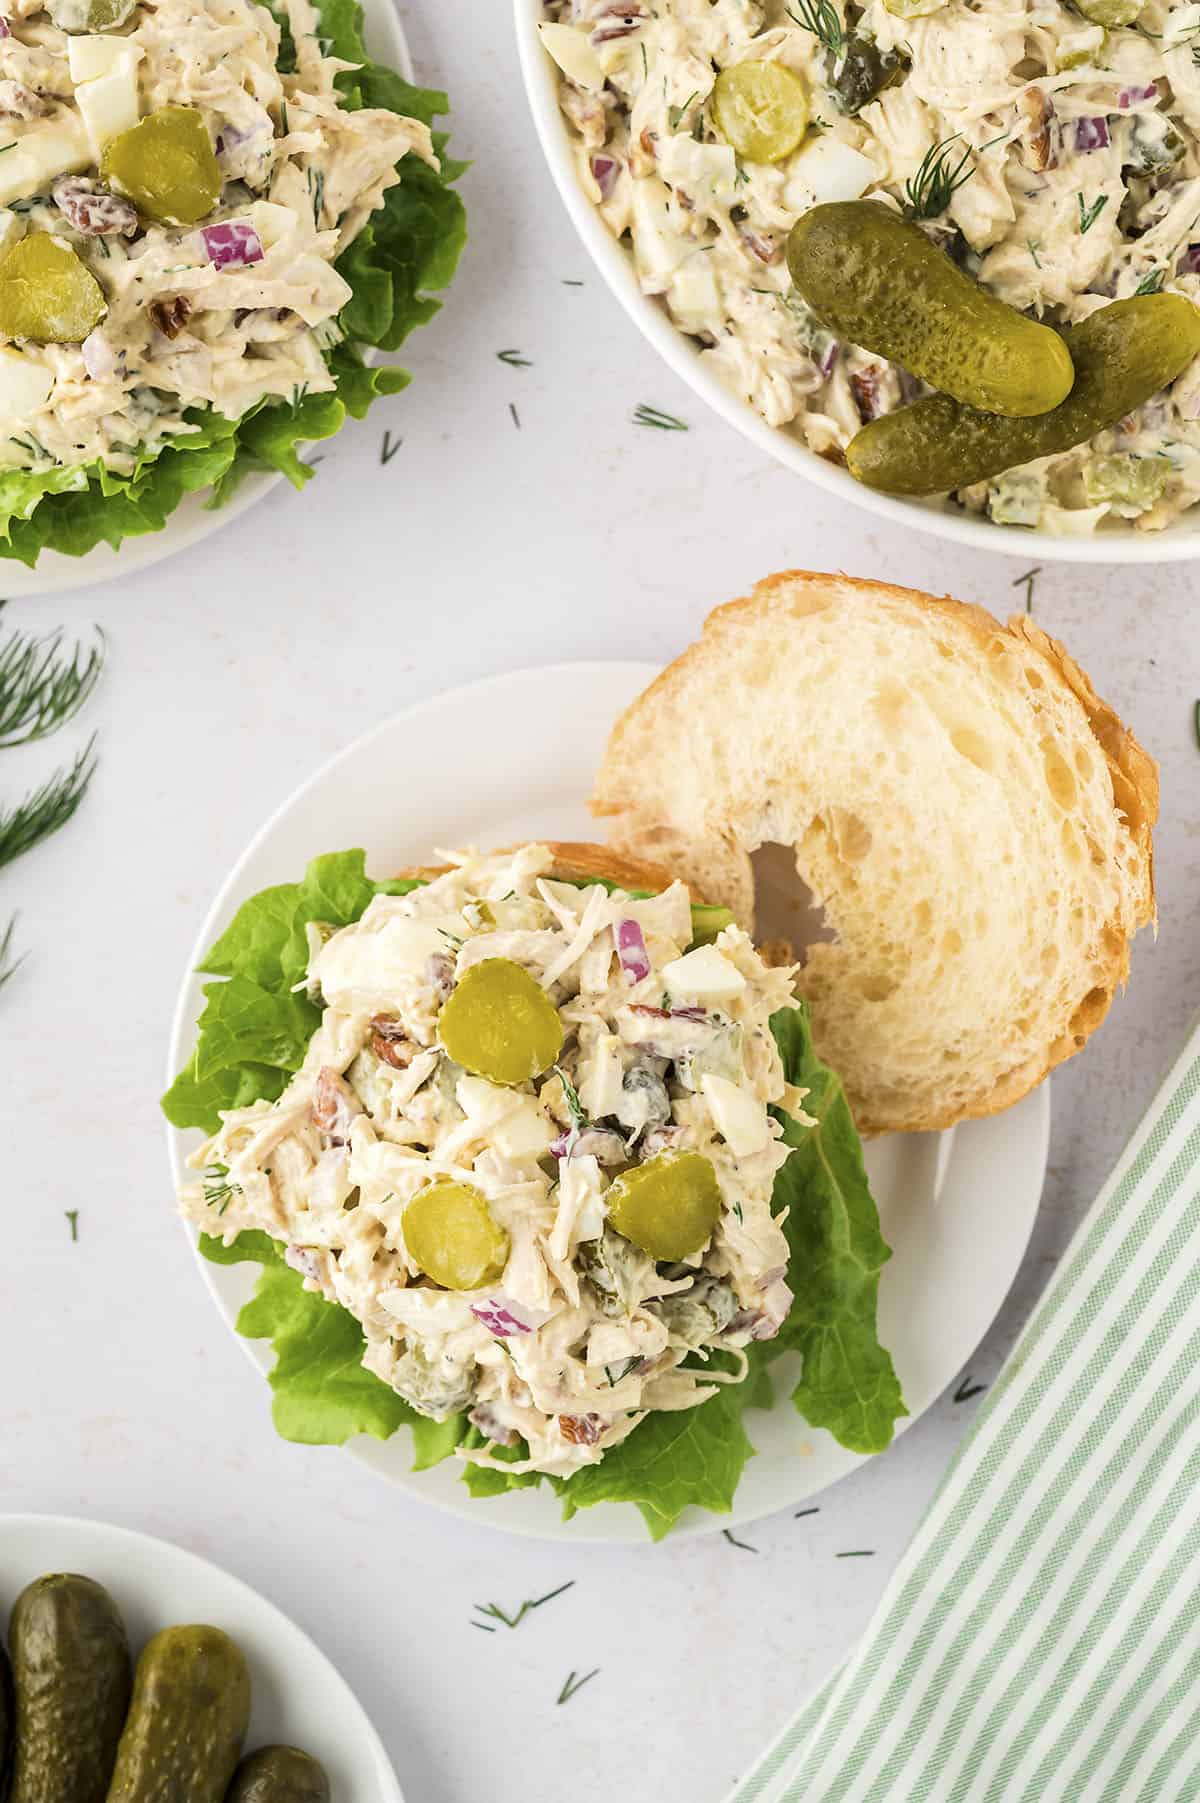 Croissant topped with dill pickle chicken salad recipe.